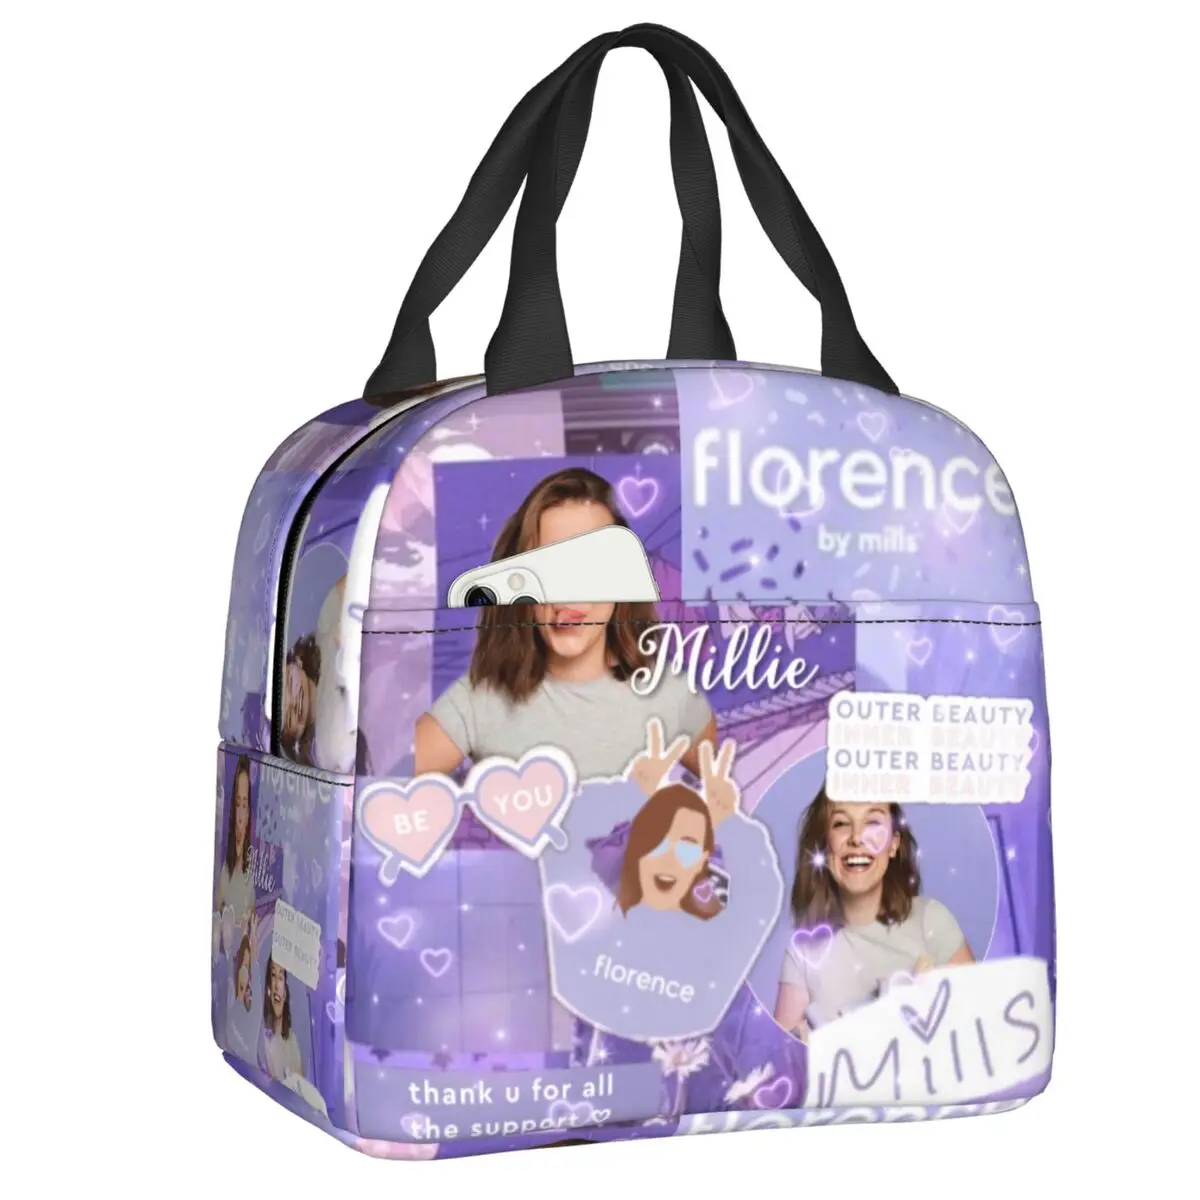 Florence By Mills Insulated Lunch Bag Waterproof Cooler Thermal Bento Box For Women Kids School Work Picnic Food Tote Bags